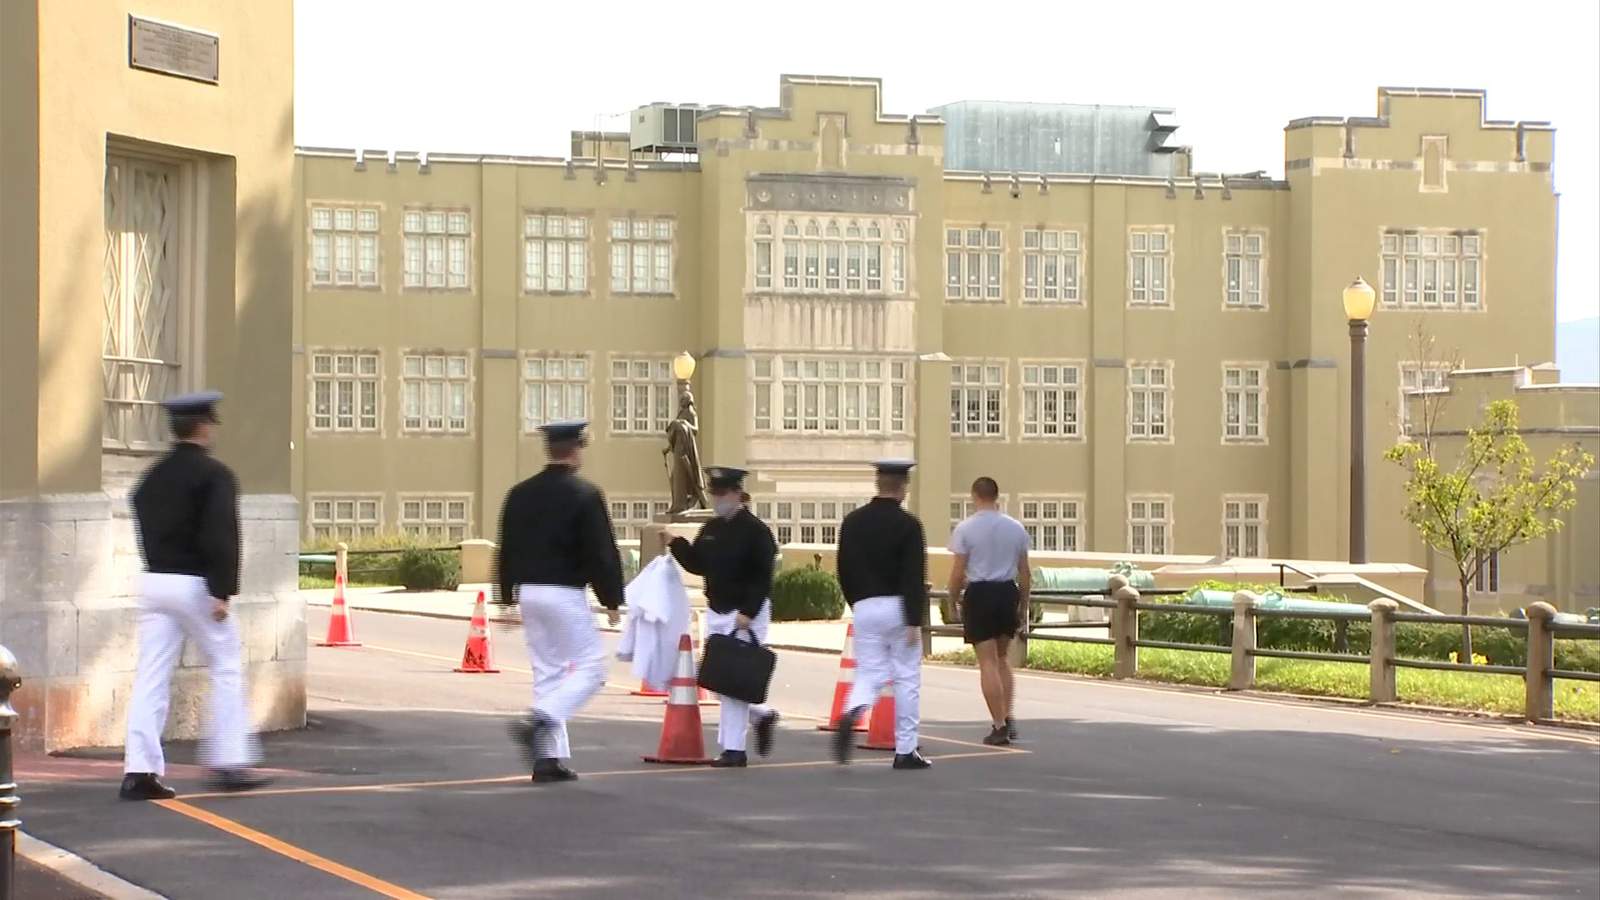 Virginia Military Institute has 42 active COVID-19 cases, with nearly 200 cadets in quarantine